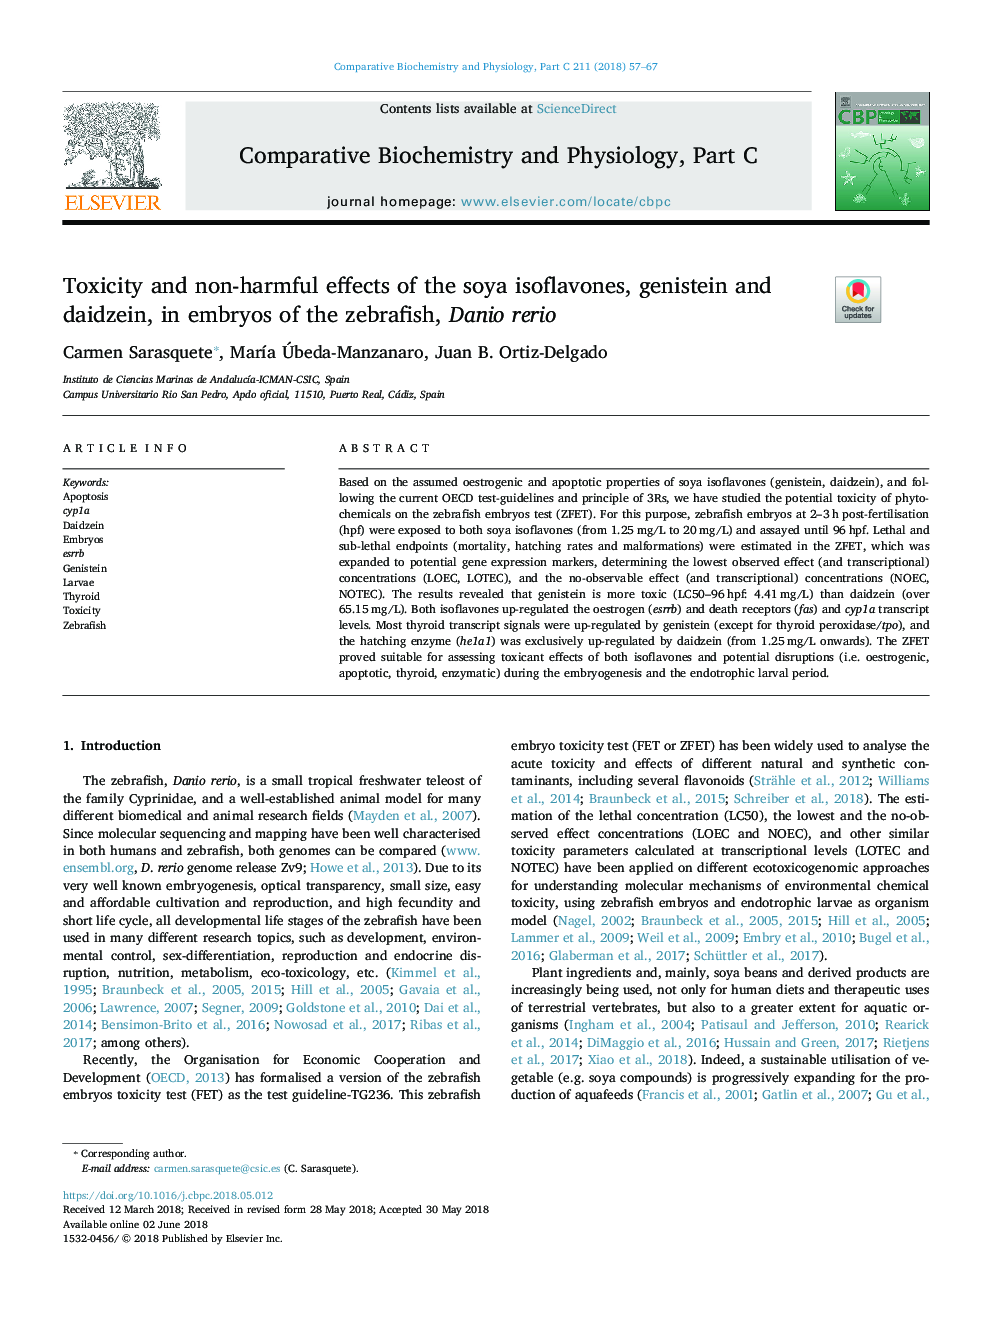 Toxicity and non-harmful effects of the soya isoflavones, genistein and daidzein, in embryos of the zebrafish, Danio rerio